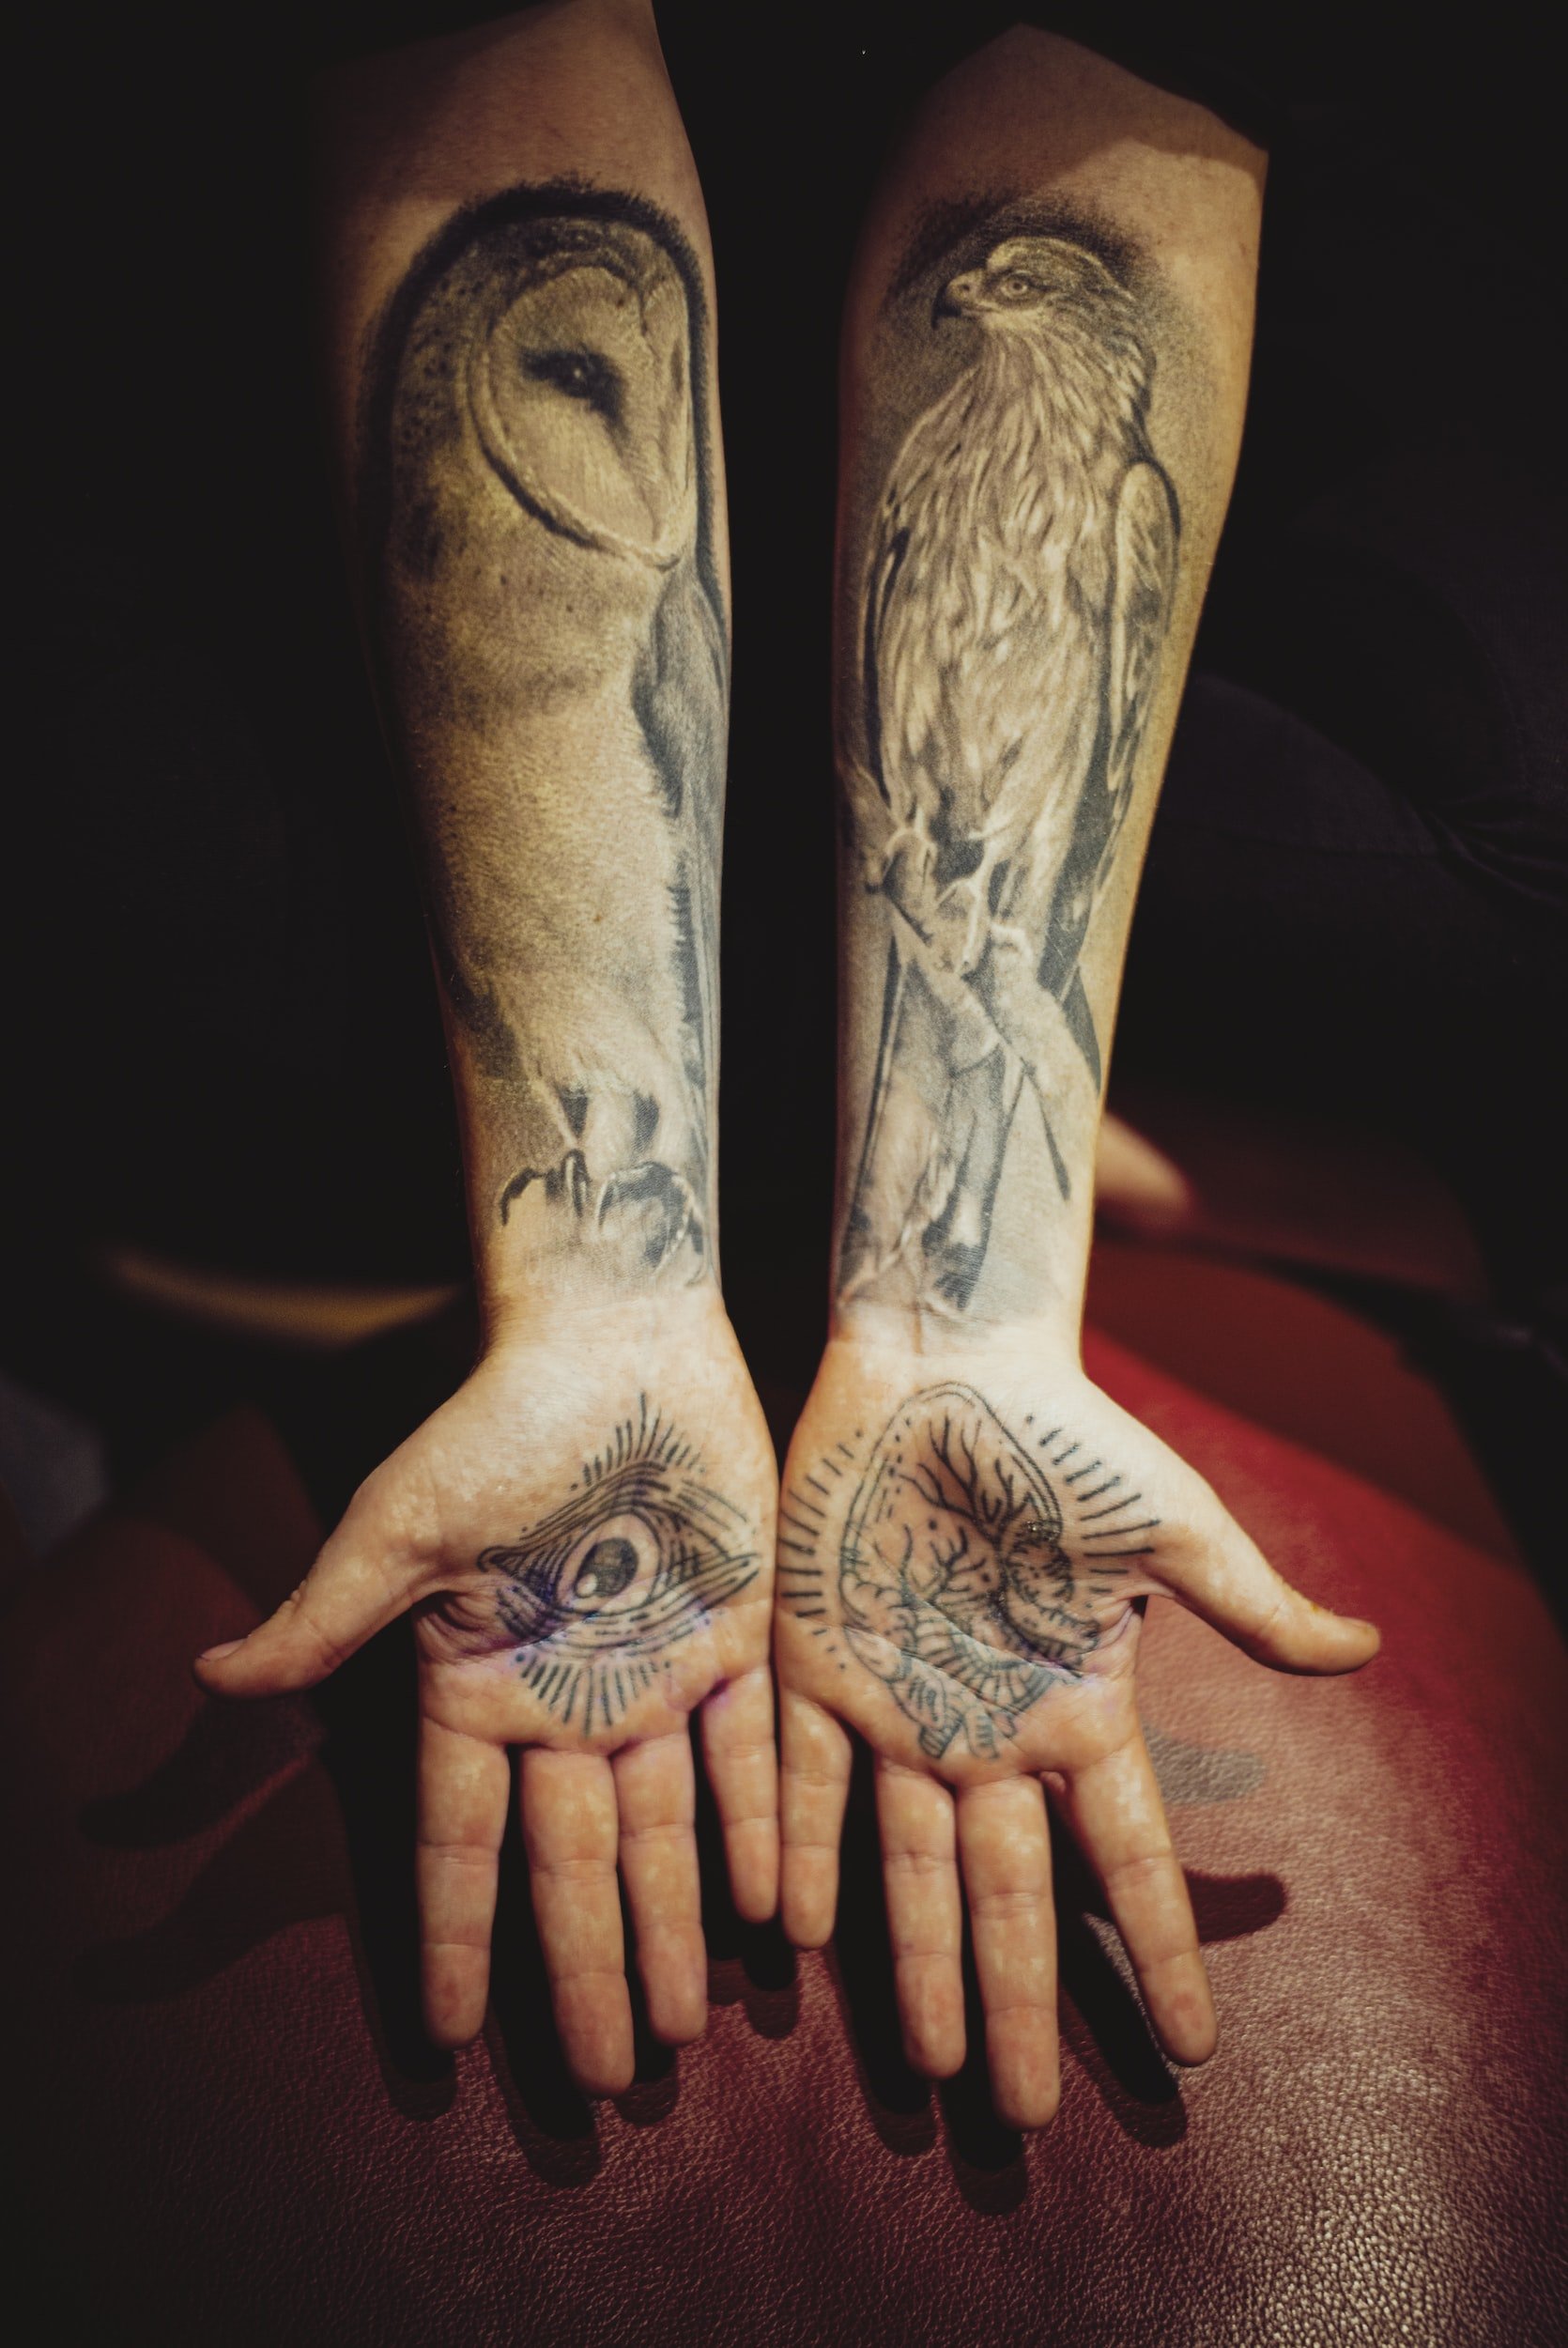 Hand Tattoos for Men: 7 Pictures of Meaningful Tattoos — CHELSIDERMY